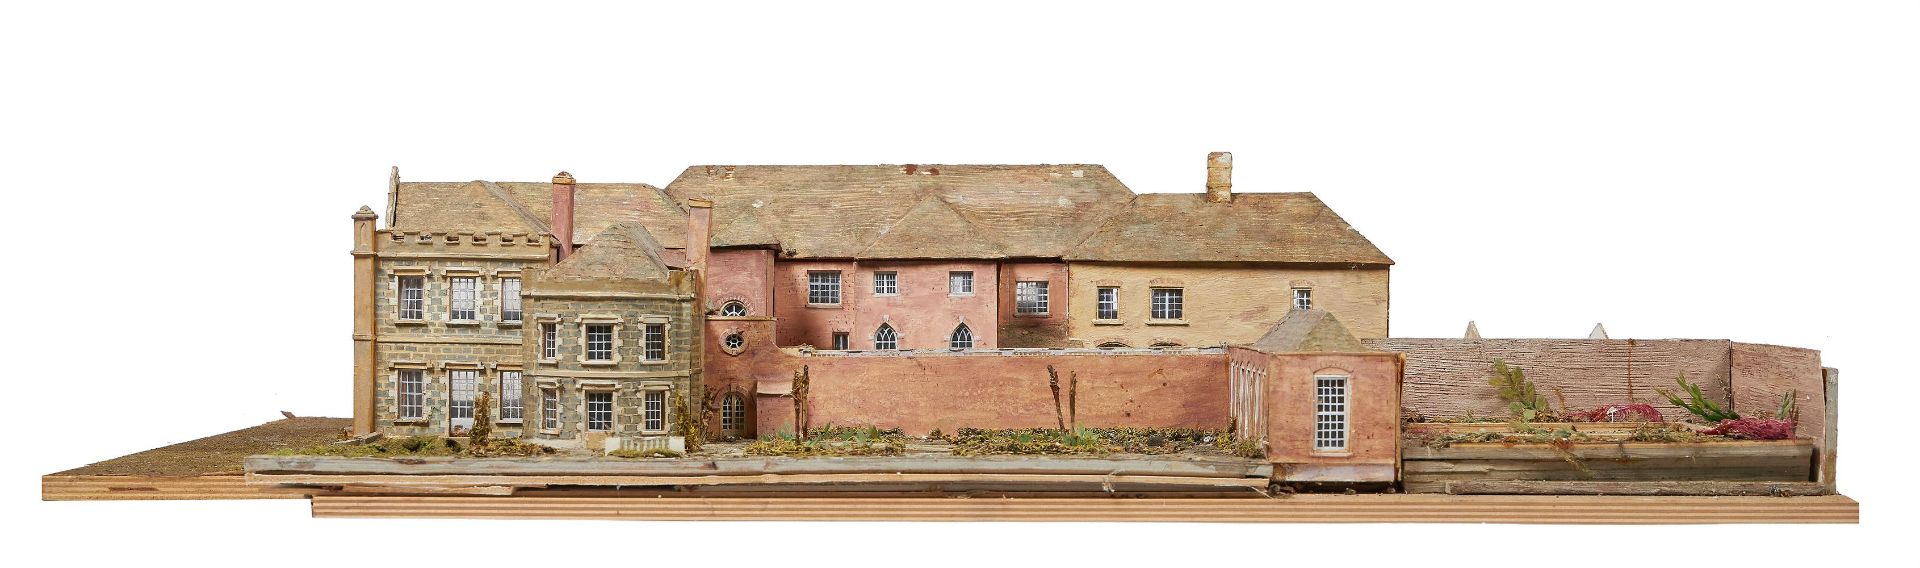 AN ARCHITECTURAL MODEL OF FLAXLEY ABBEY, BY OLIVER MESSEL - Image 13 of 34